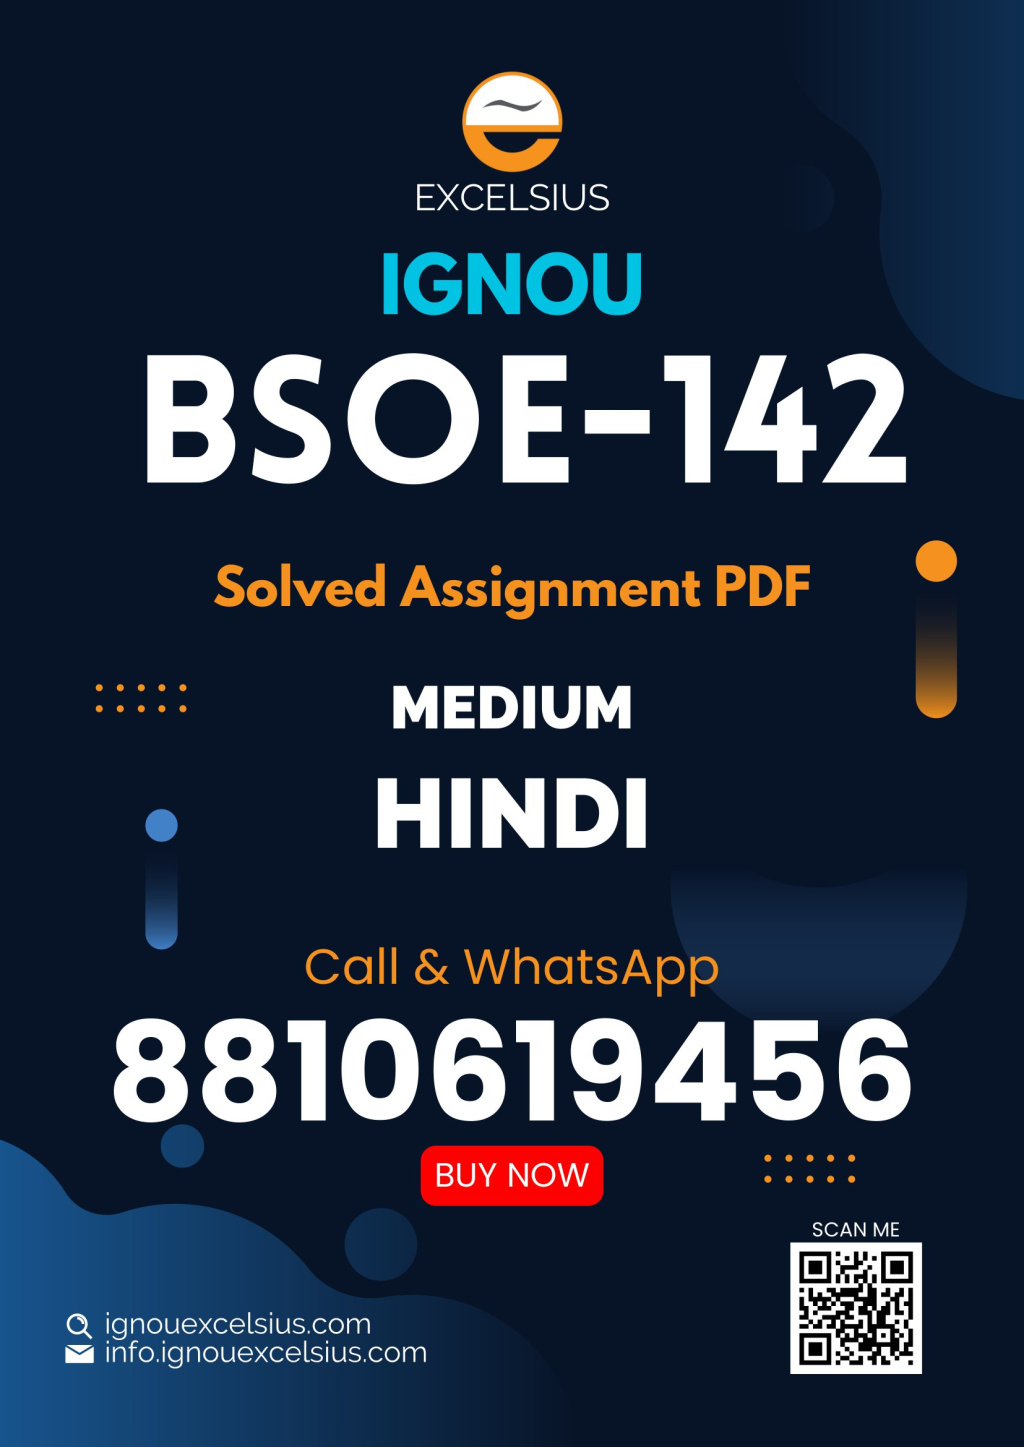 IGNOU BSOE-142 - Religion and Society, Latest Solved Assignment-July 2022 – January 2023